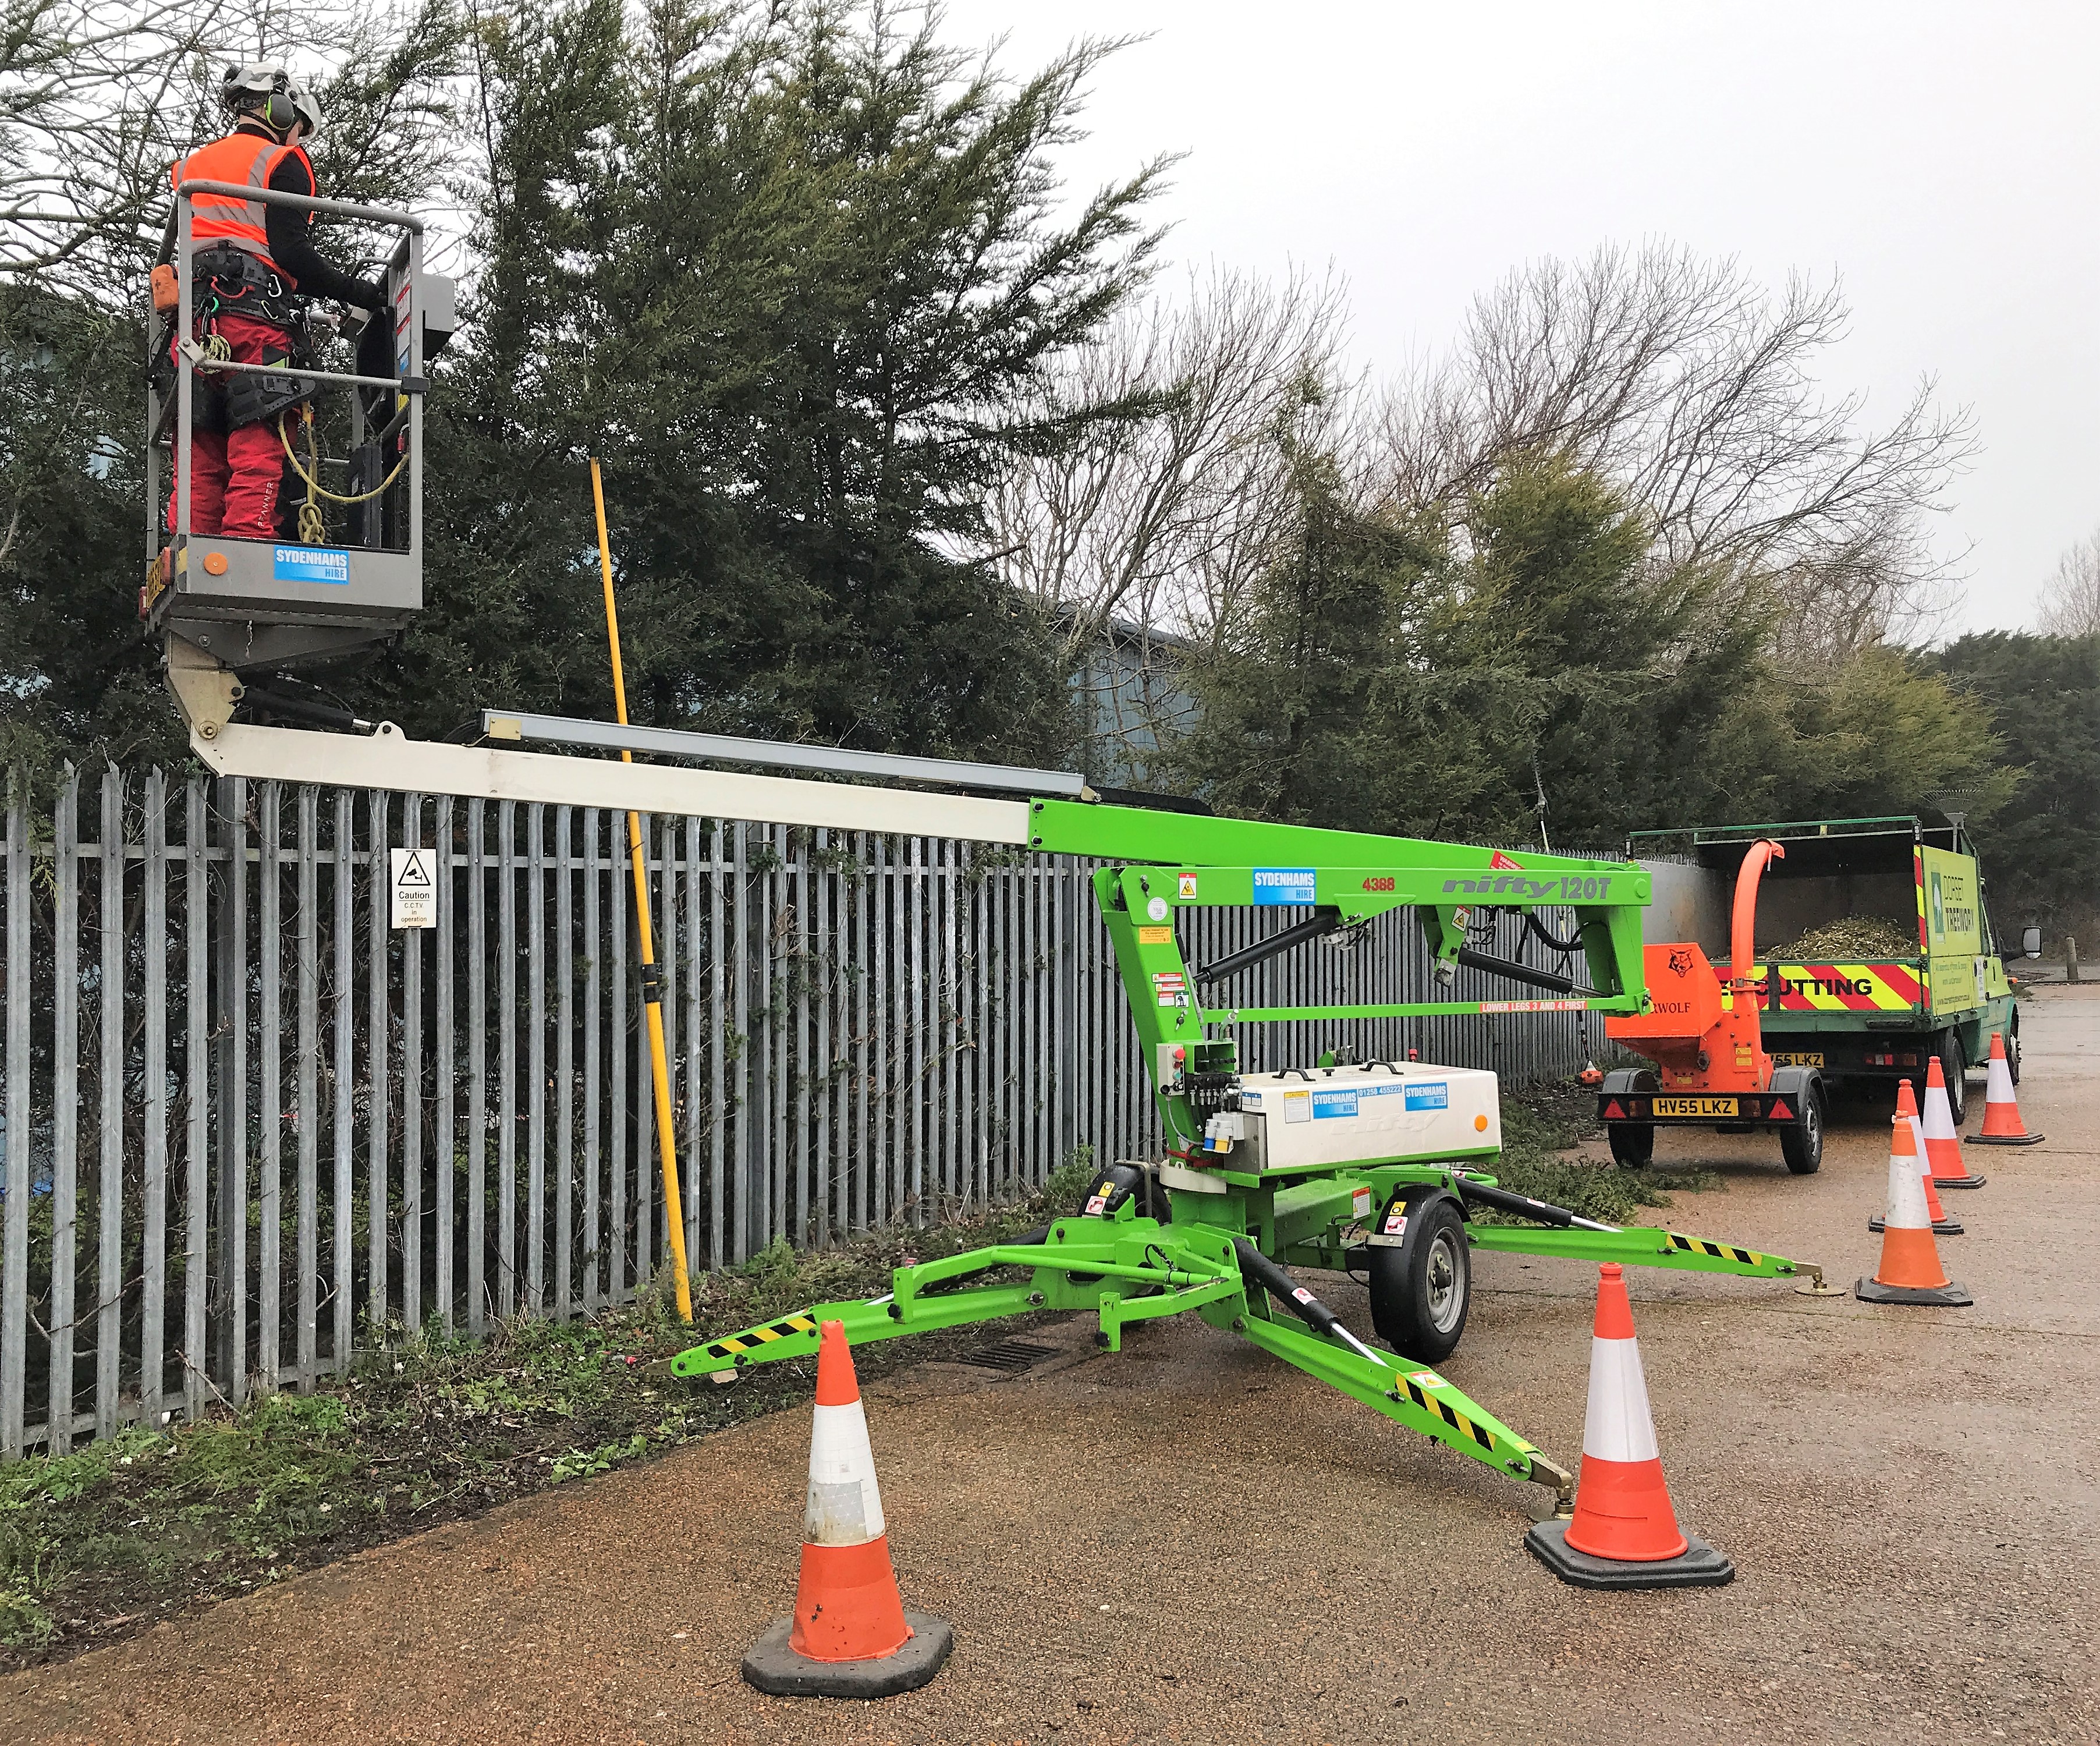 Hedge reduction maintenance service in Weymouth, Dorchester, Portland in Dorset for private and commercial clients - Dorset Treeworx Ltd offering hedge trimming, hedge removal, hedge cutting, hedge stump grinding services